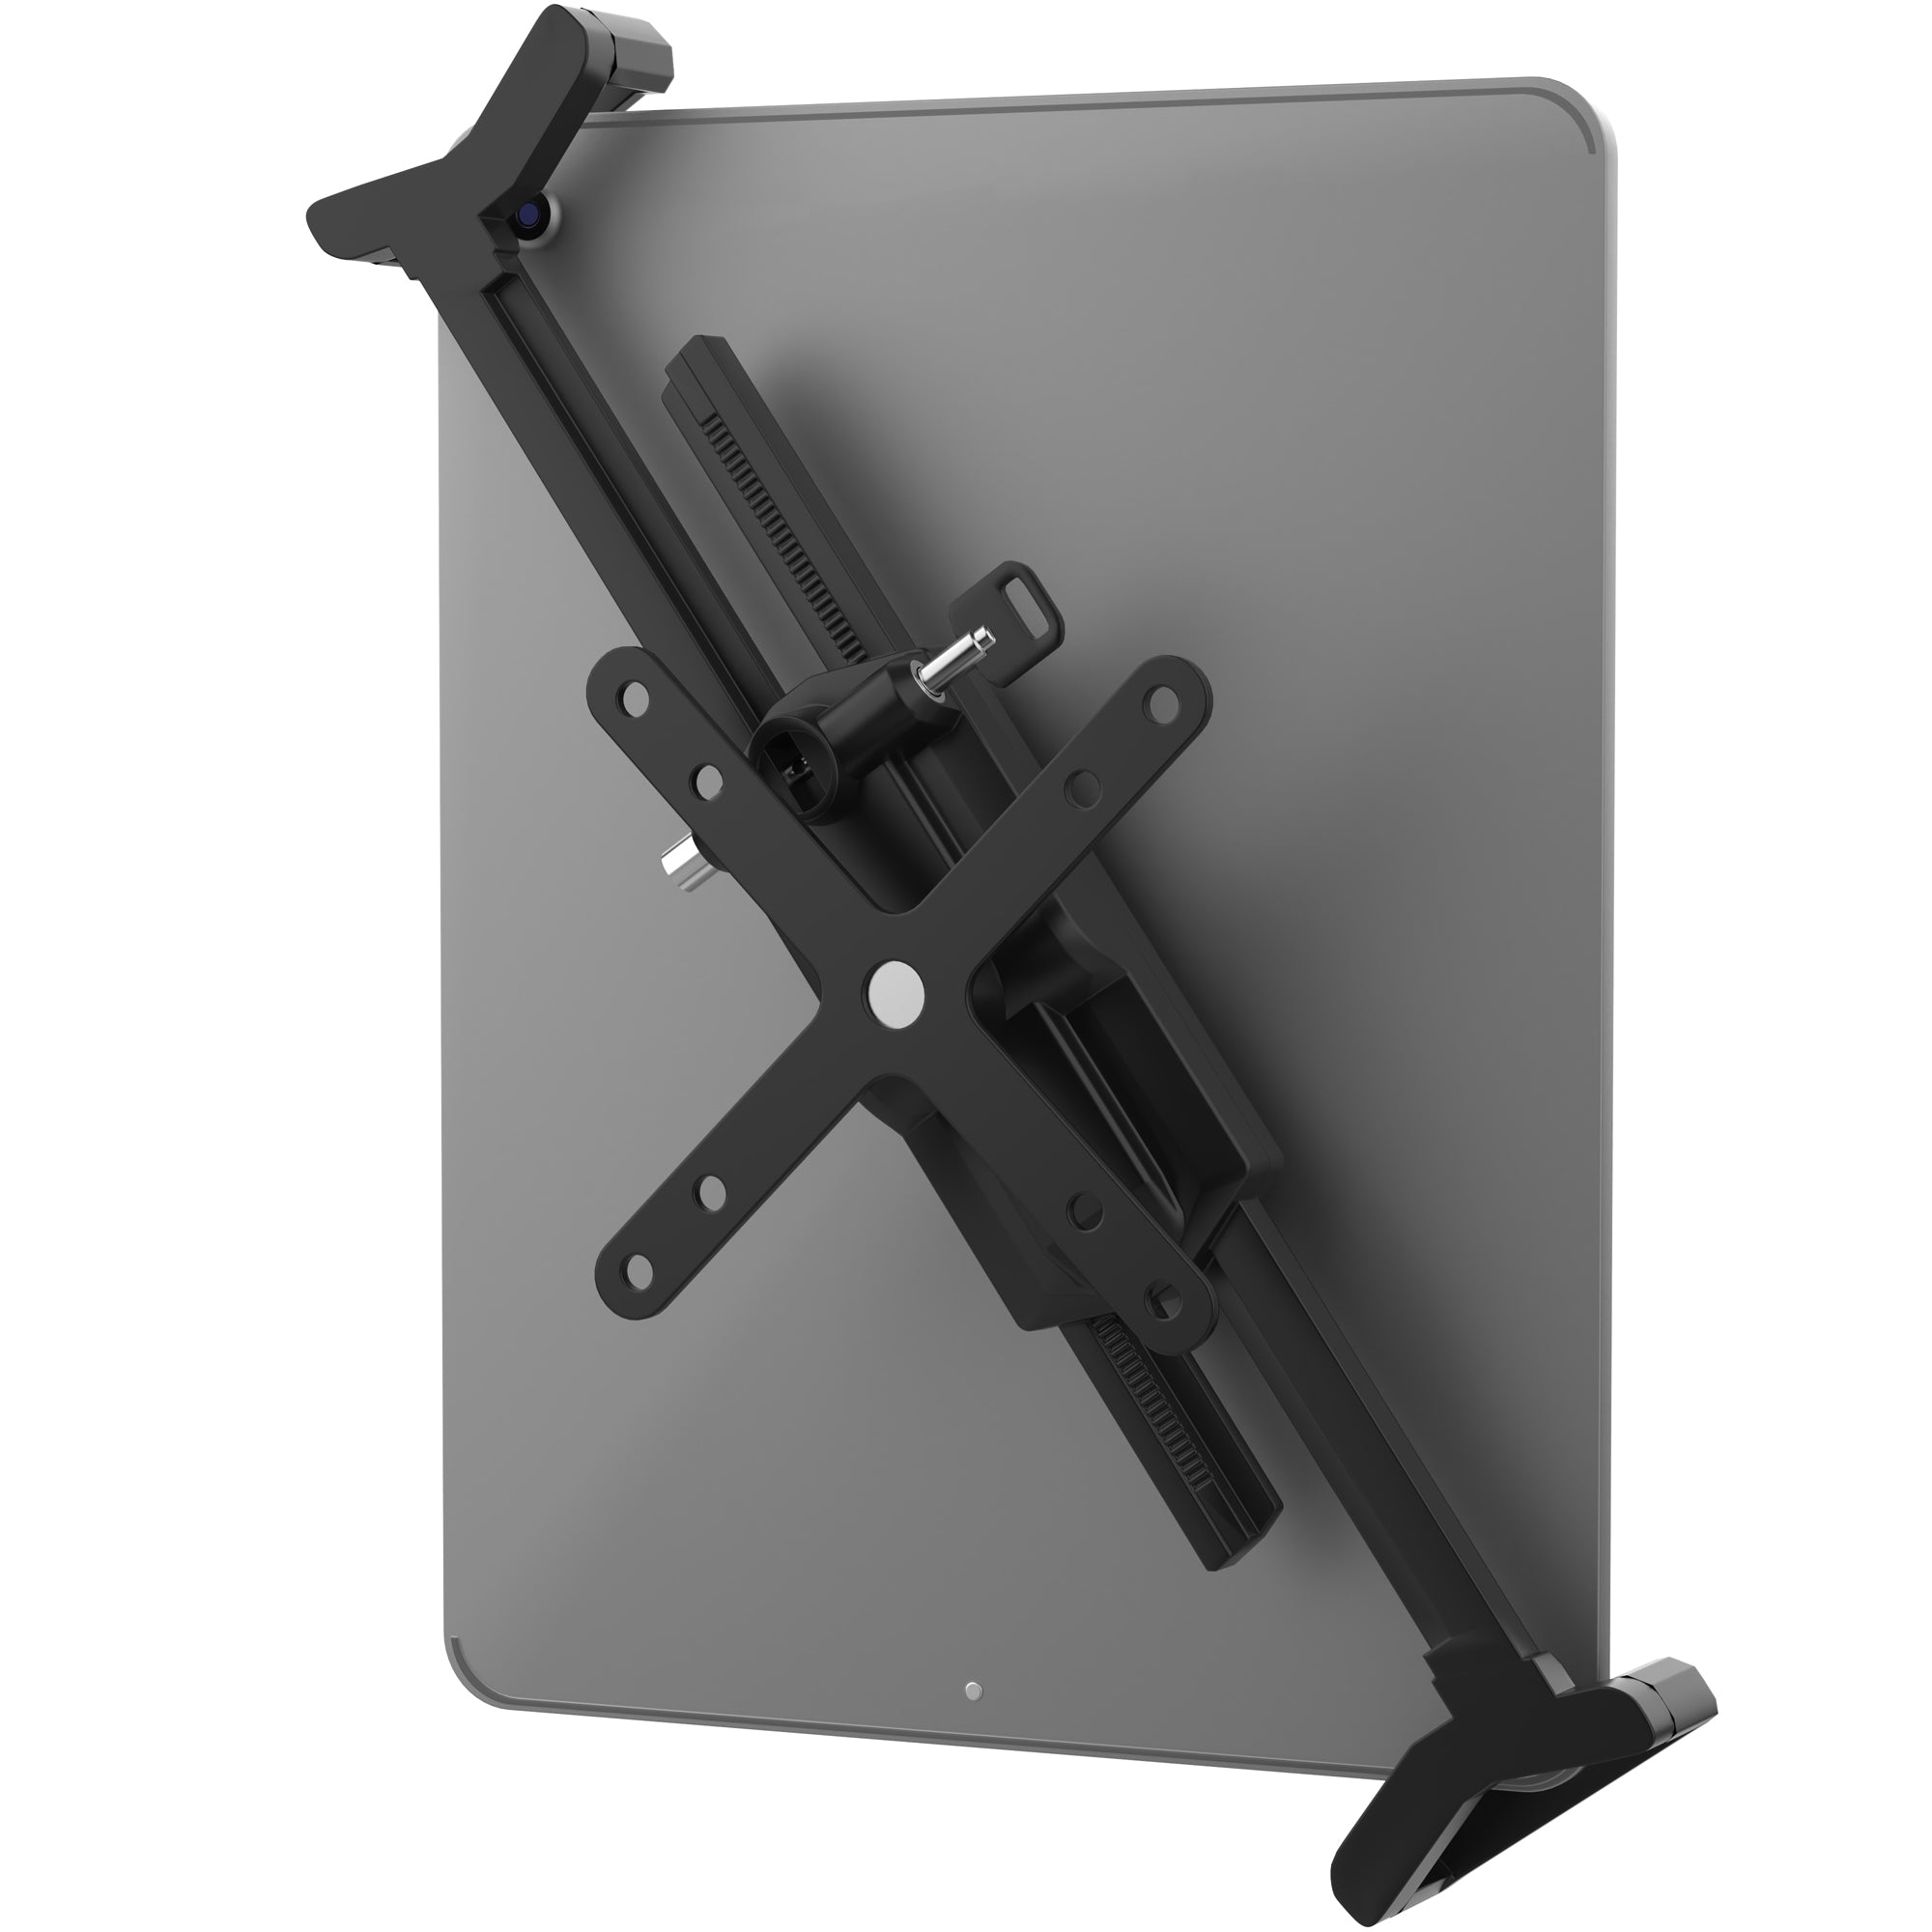 Security VESA and Wall Mount for 7-14 Inch Tablets, including for iPad 10.2", iPad Air & iPad Pro 11" - M2/M4, iPad Air & iPad Pro 13" - M2/M4 and More